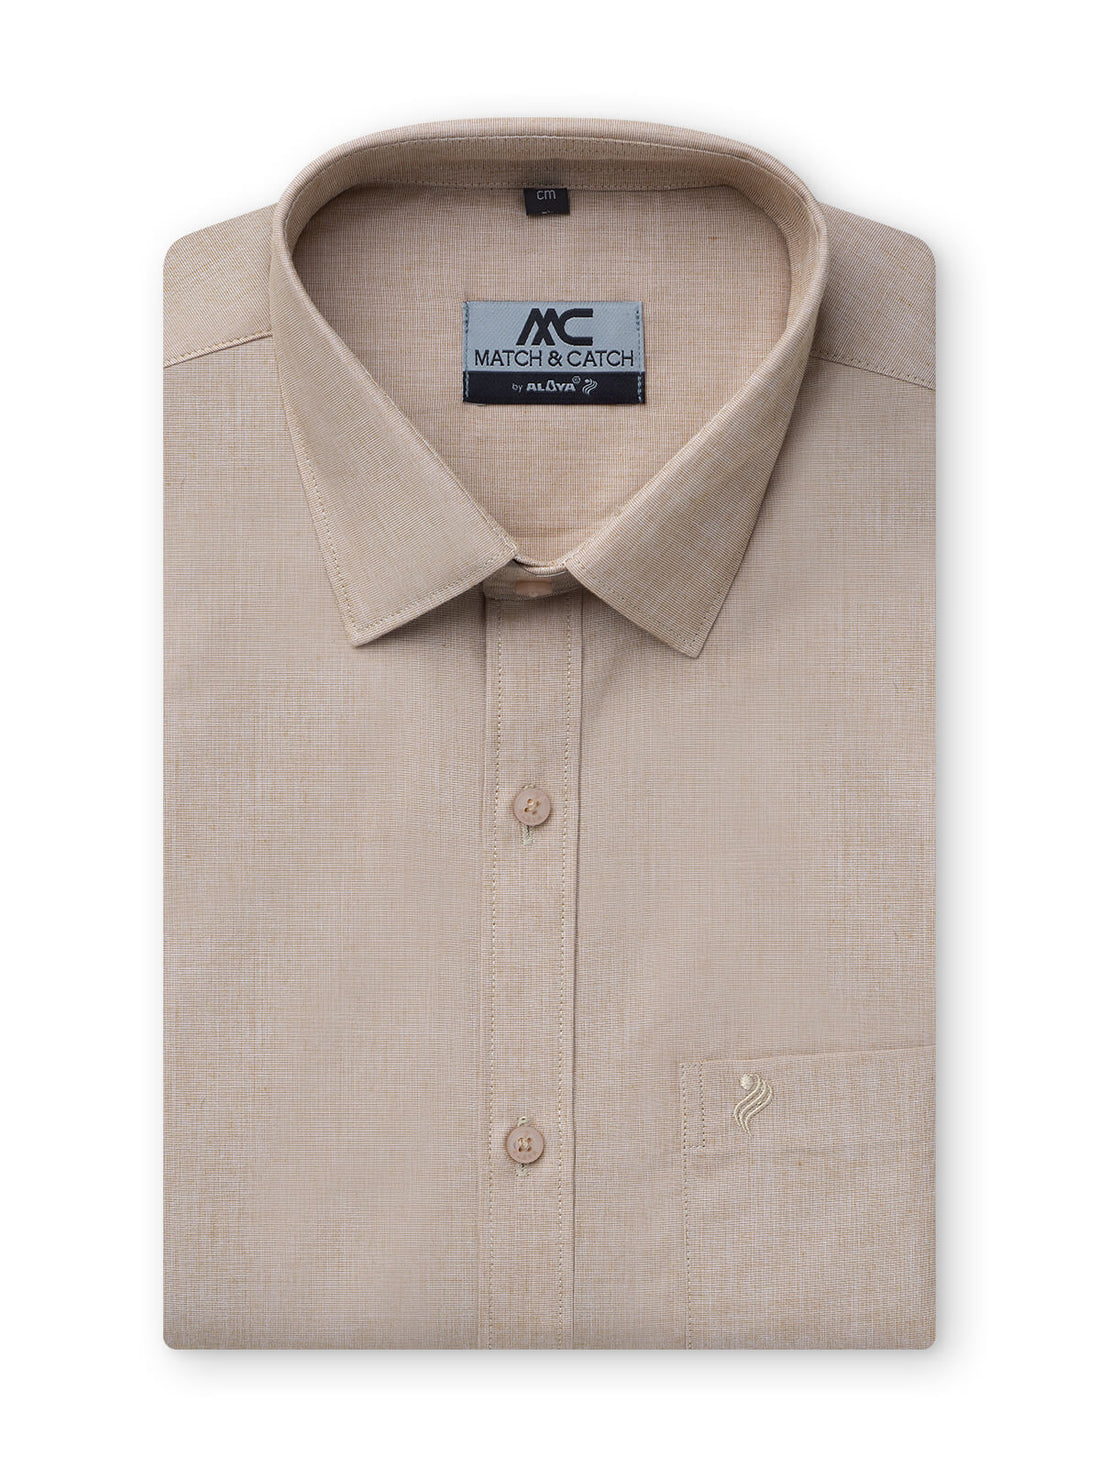 Men's wear combo pack features cream color polyester full-sleeve